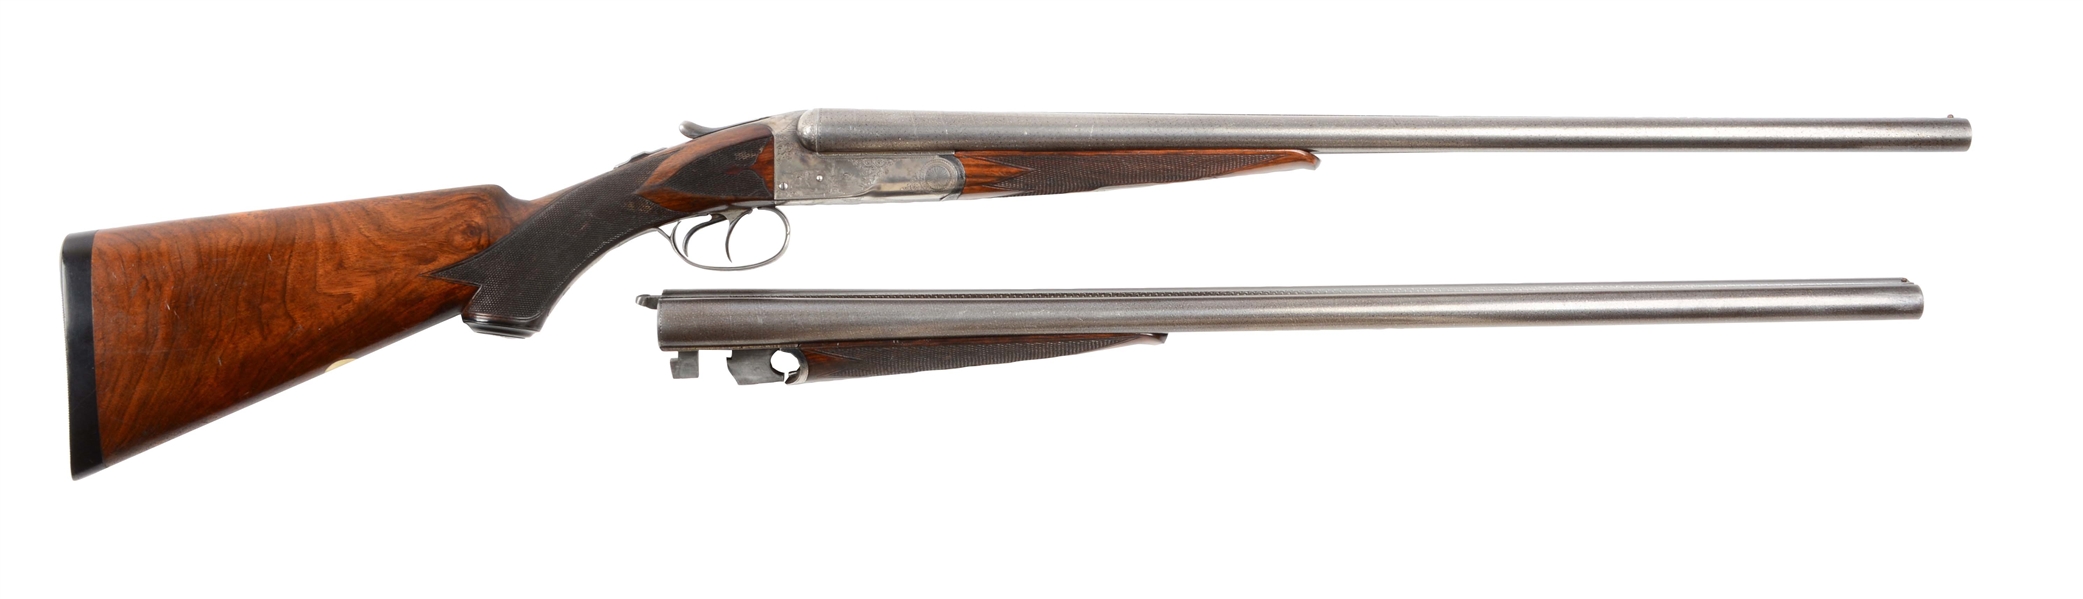 (A) CASED DELUXE FACTORY ENGRAVED COLT MODEL 1883 HAMMERLESS BOXLOCK SHOTGUN WITH 2 BARRELS.